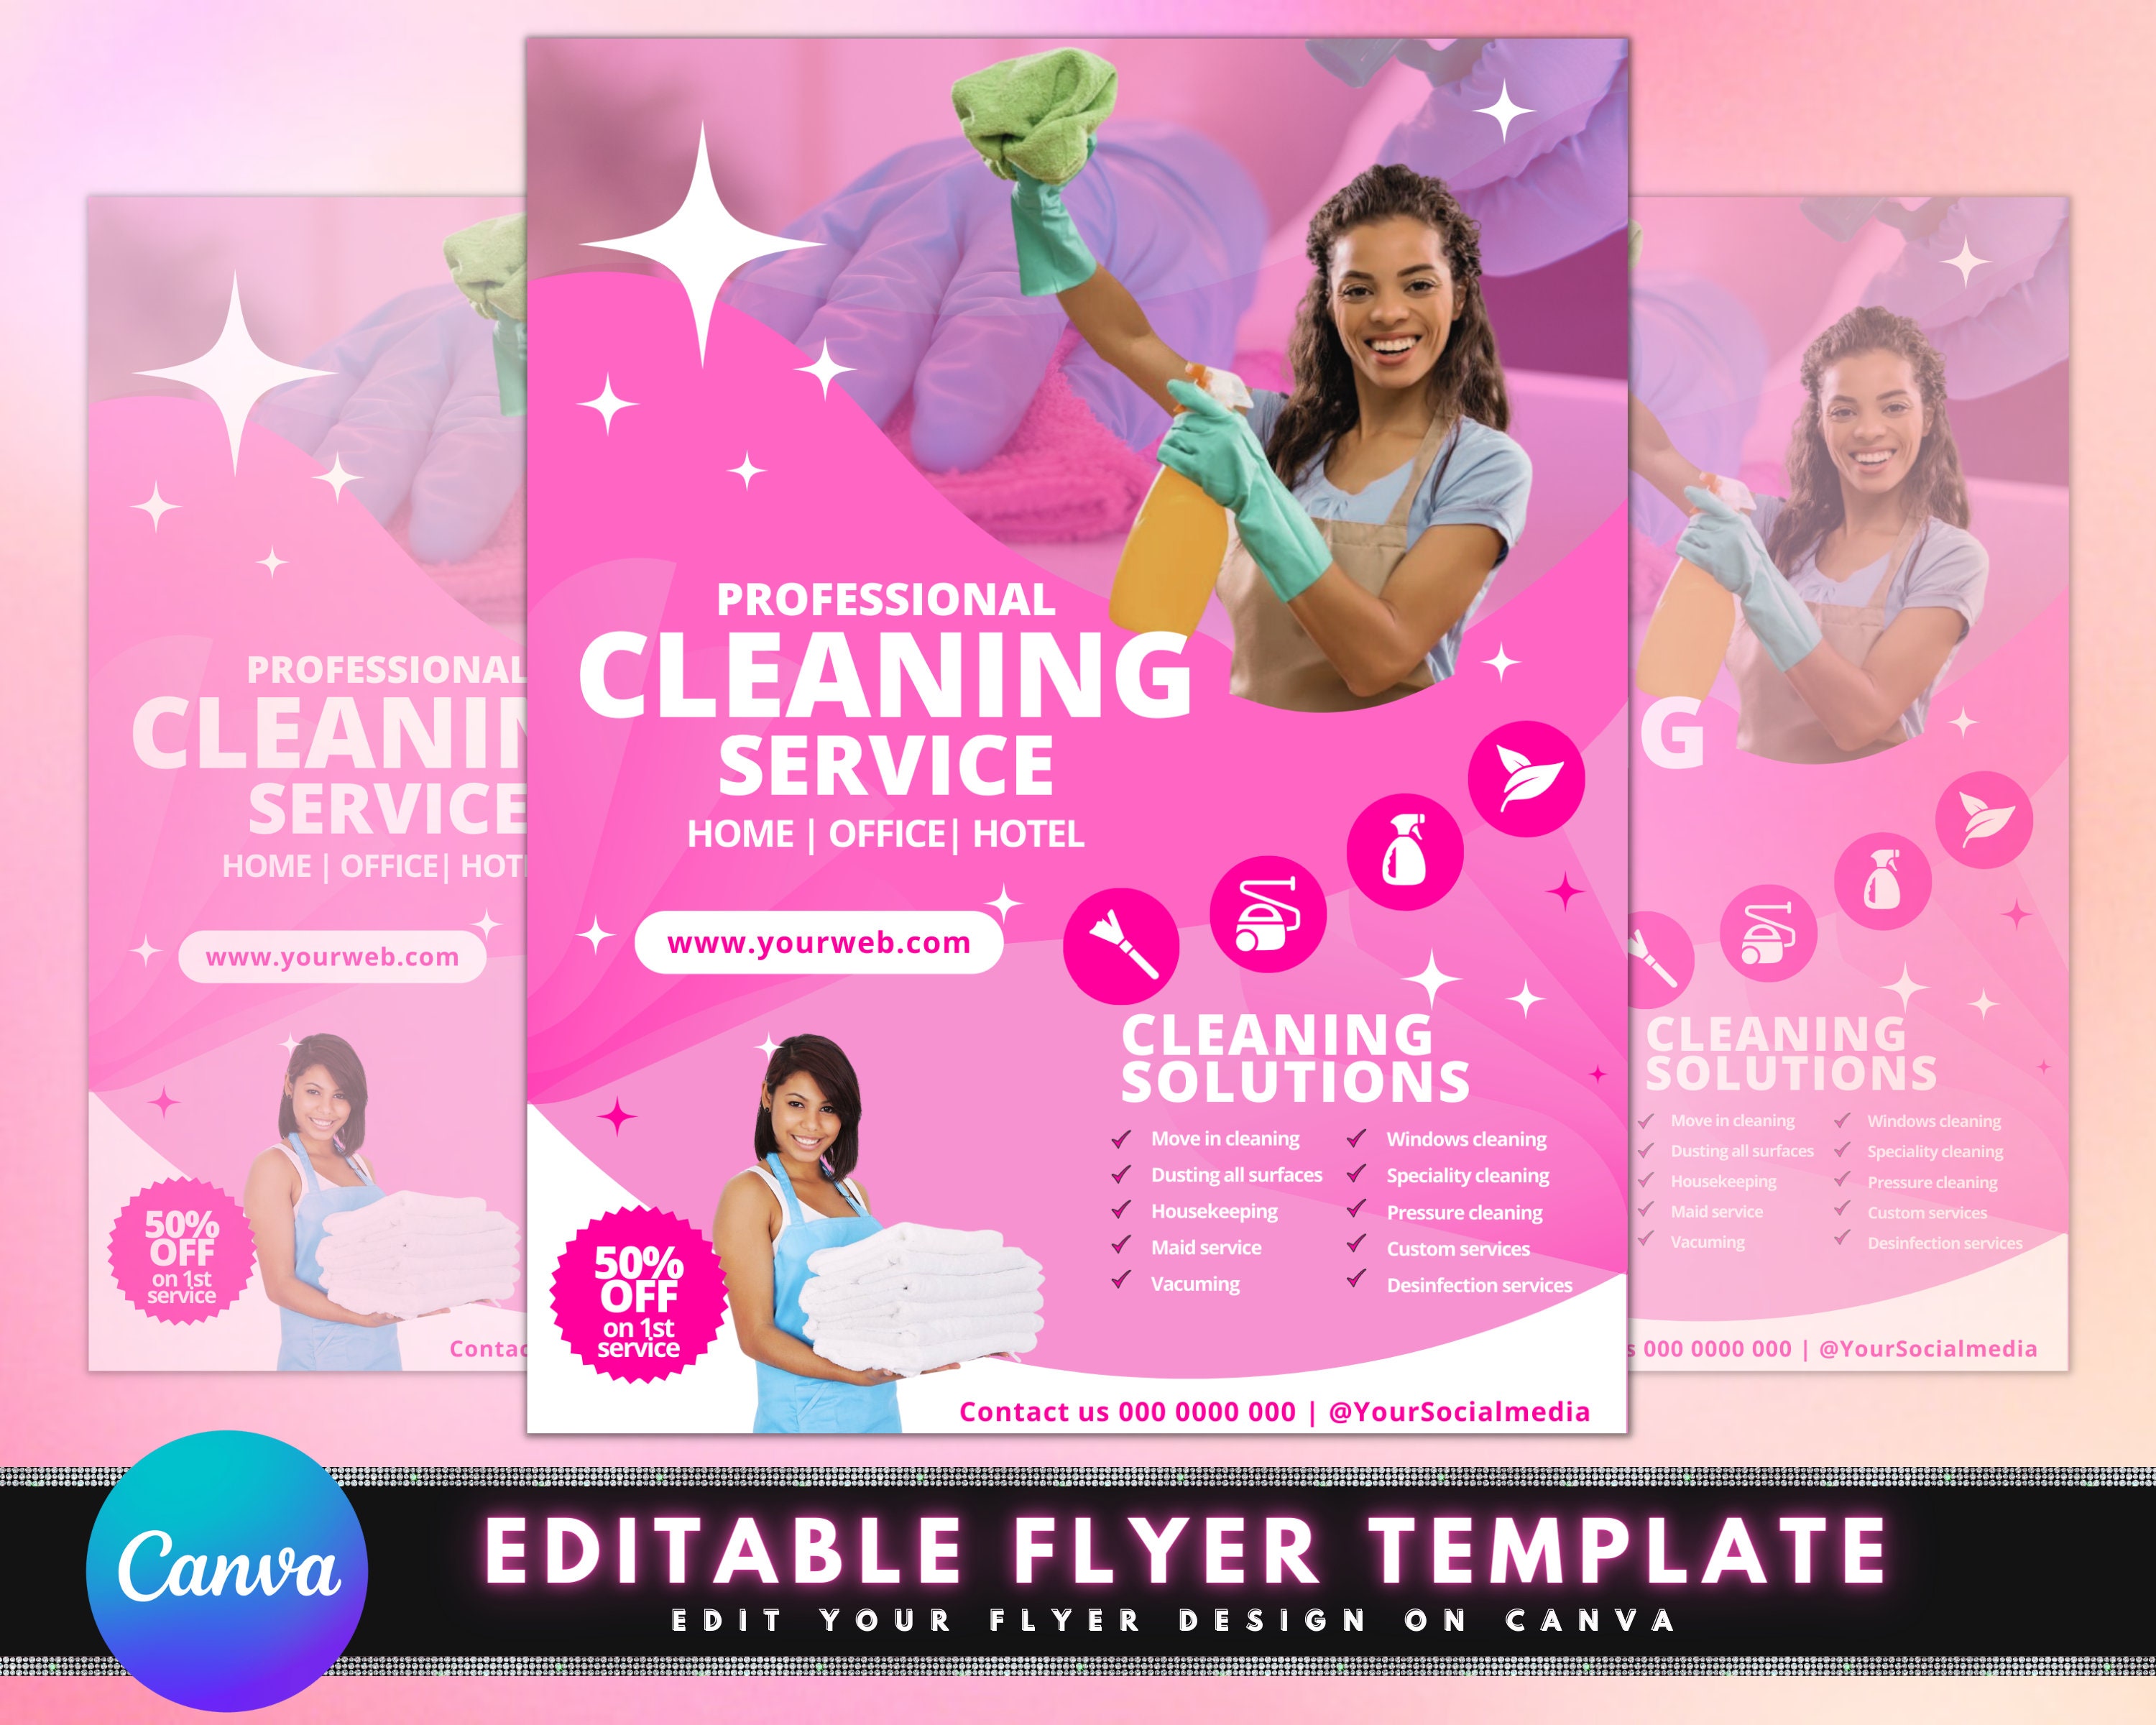 House Cleaning Services Flyer Poster